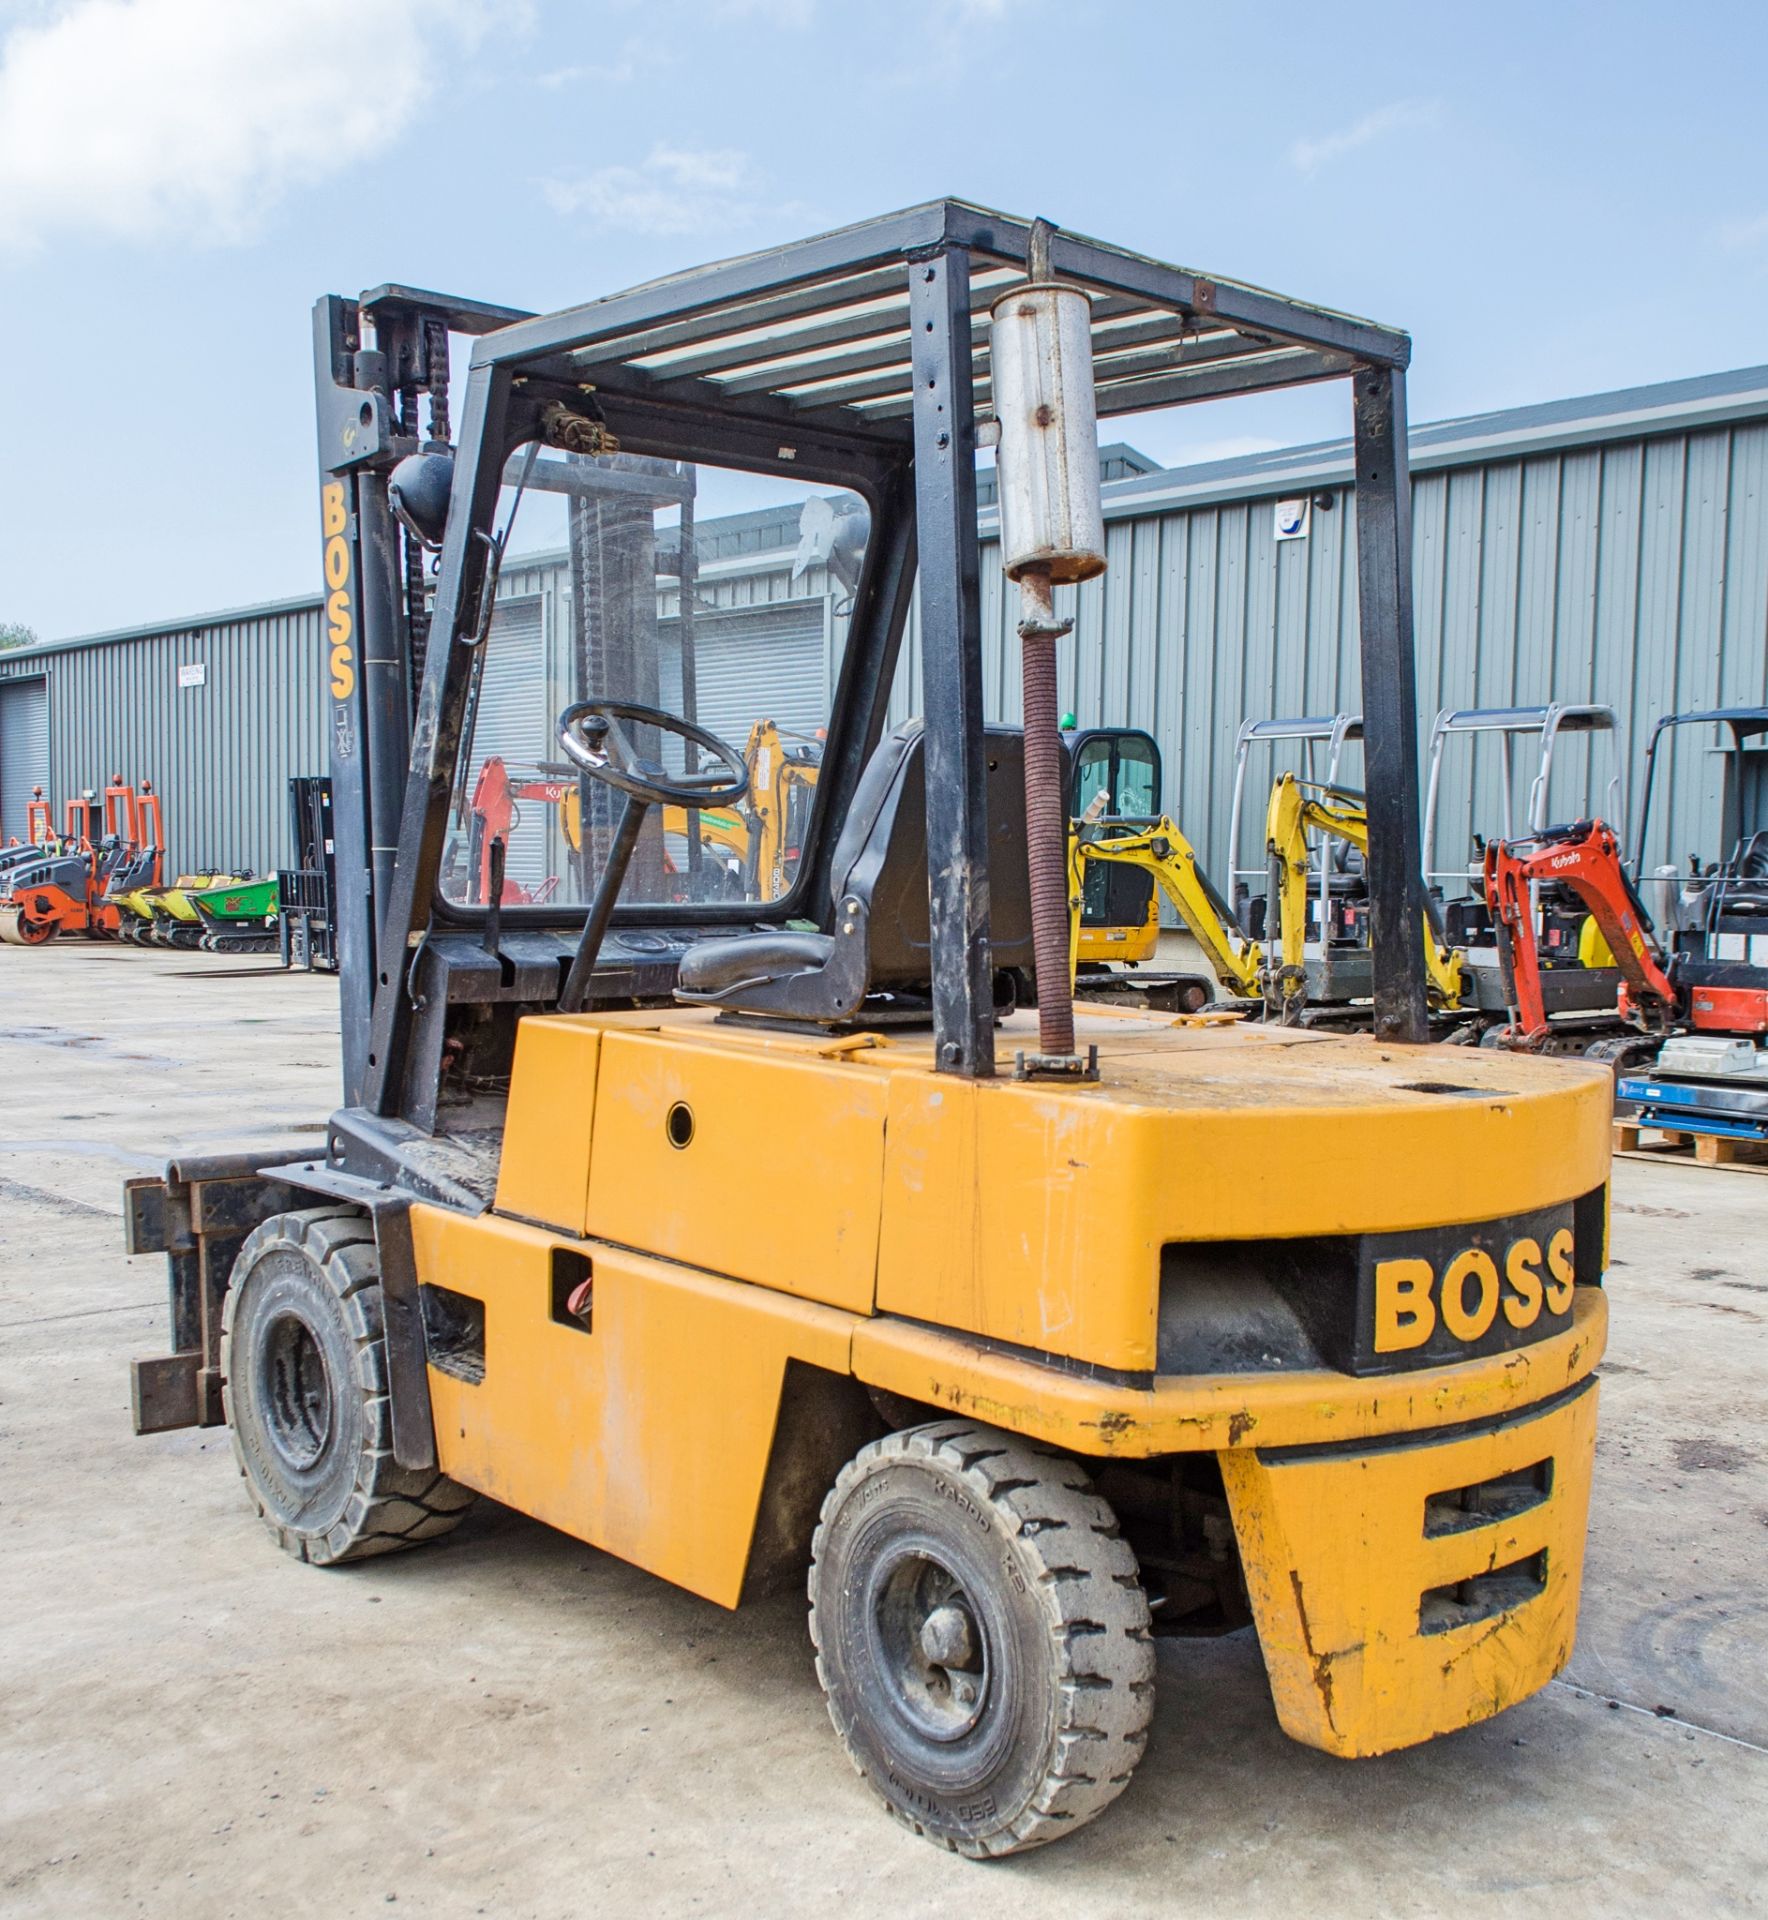 Boss RH30D 3 tonne diesel driven fork lift truck Year: Not stated on plate S/N: 01329 Recorded - Image 4 of 15